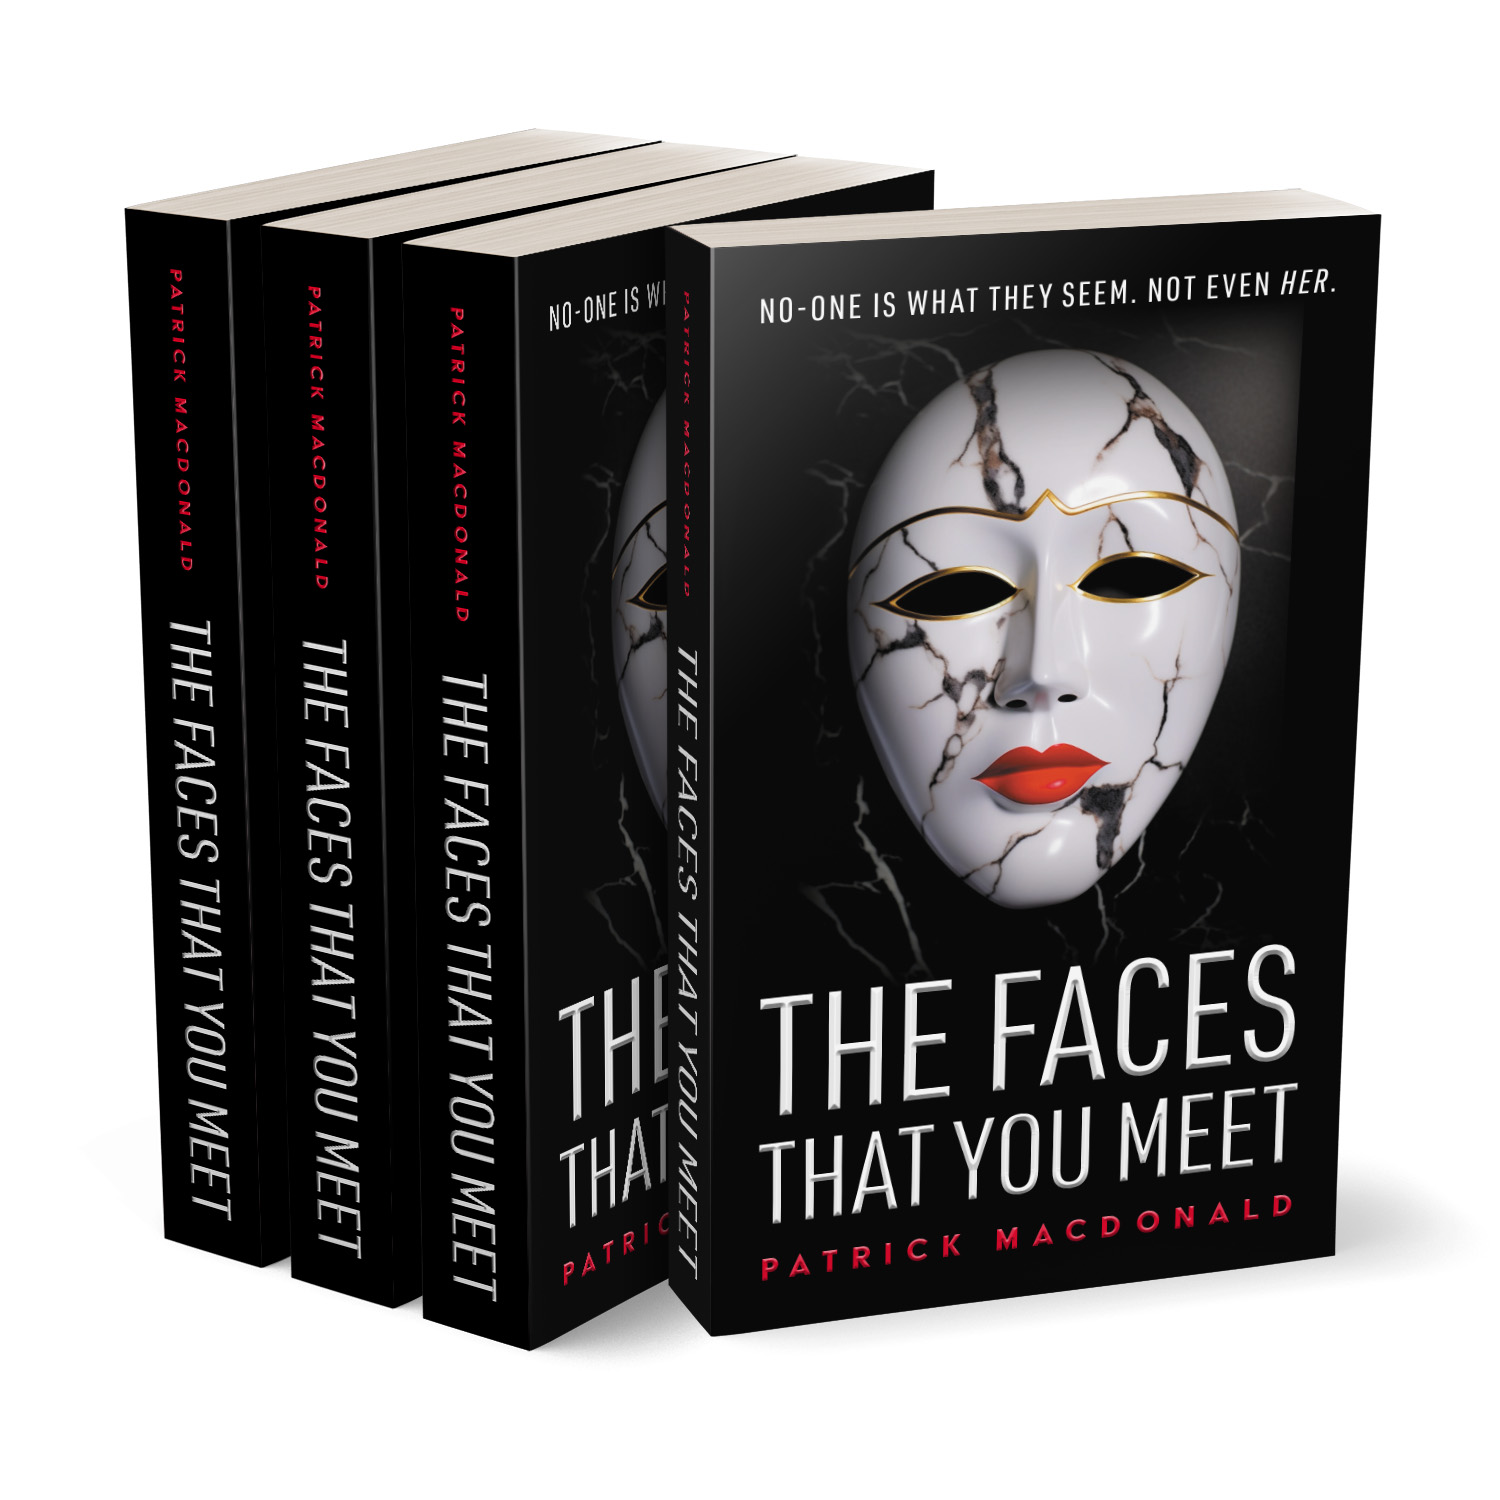 'The Faces That You Meet' is a dark, twisting thriller by Patrick Macdonald. The book cover design and interior formatting are by Mark Thomas. To learn more about what Mark could do for your book, please visit coverness.com.